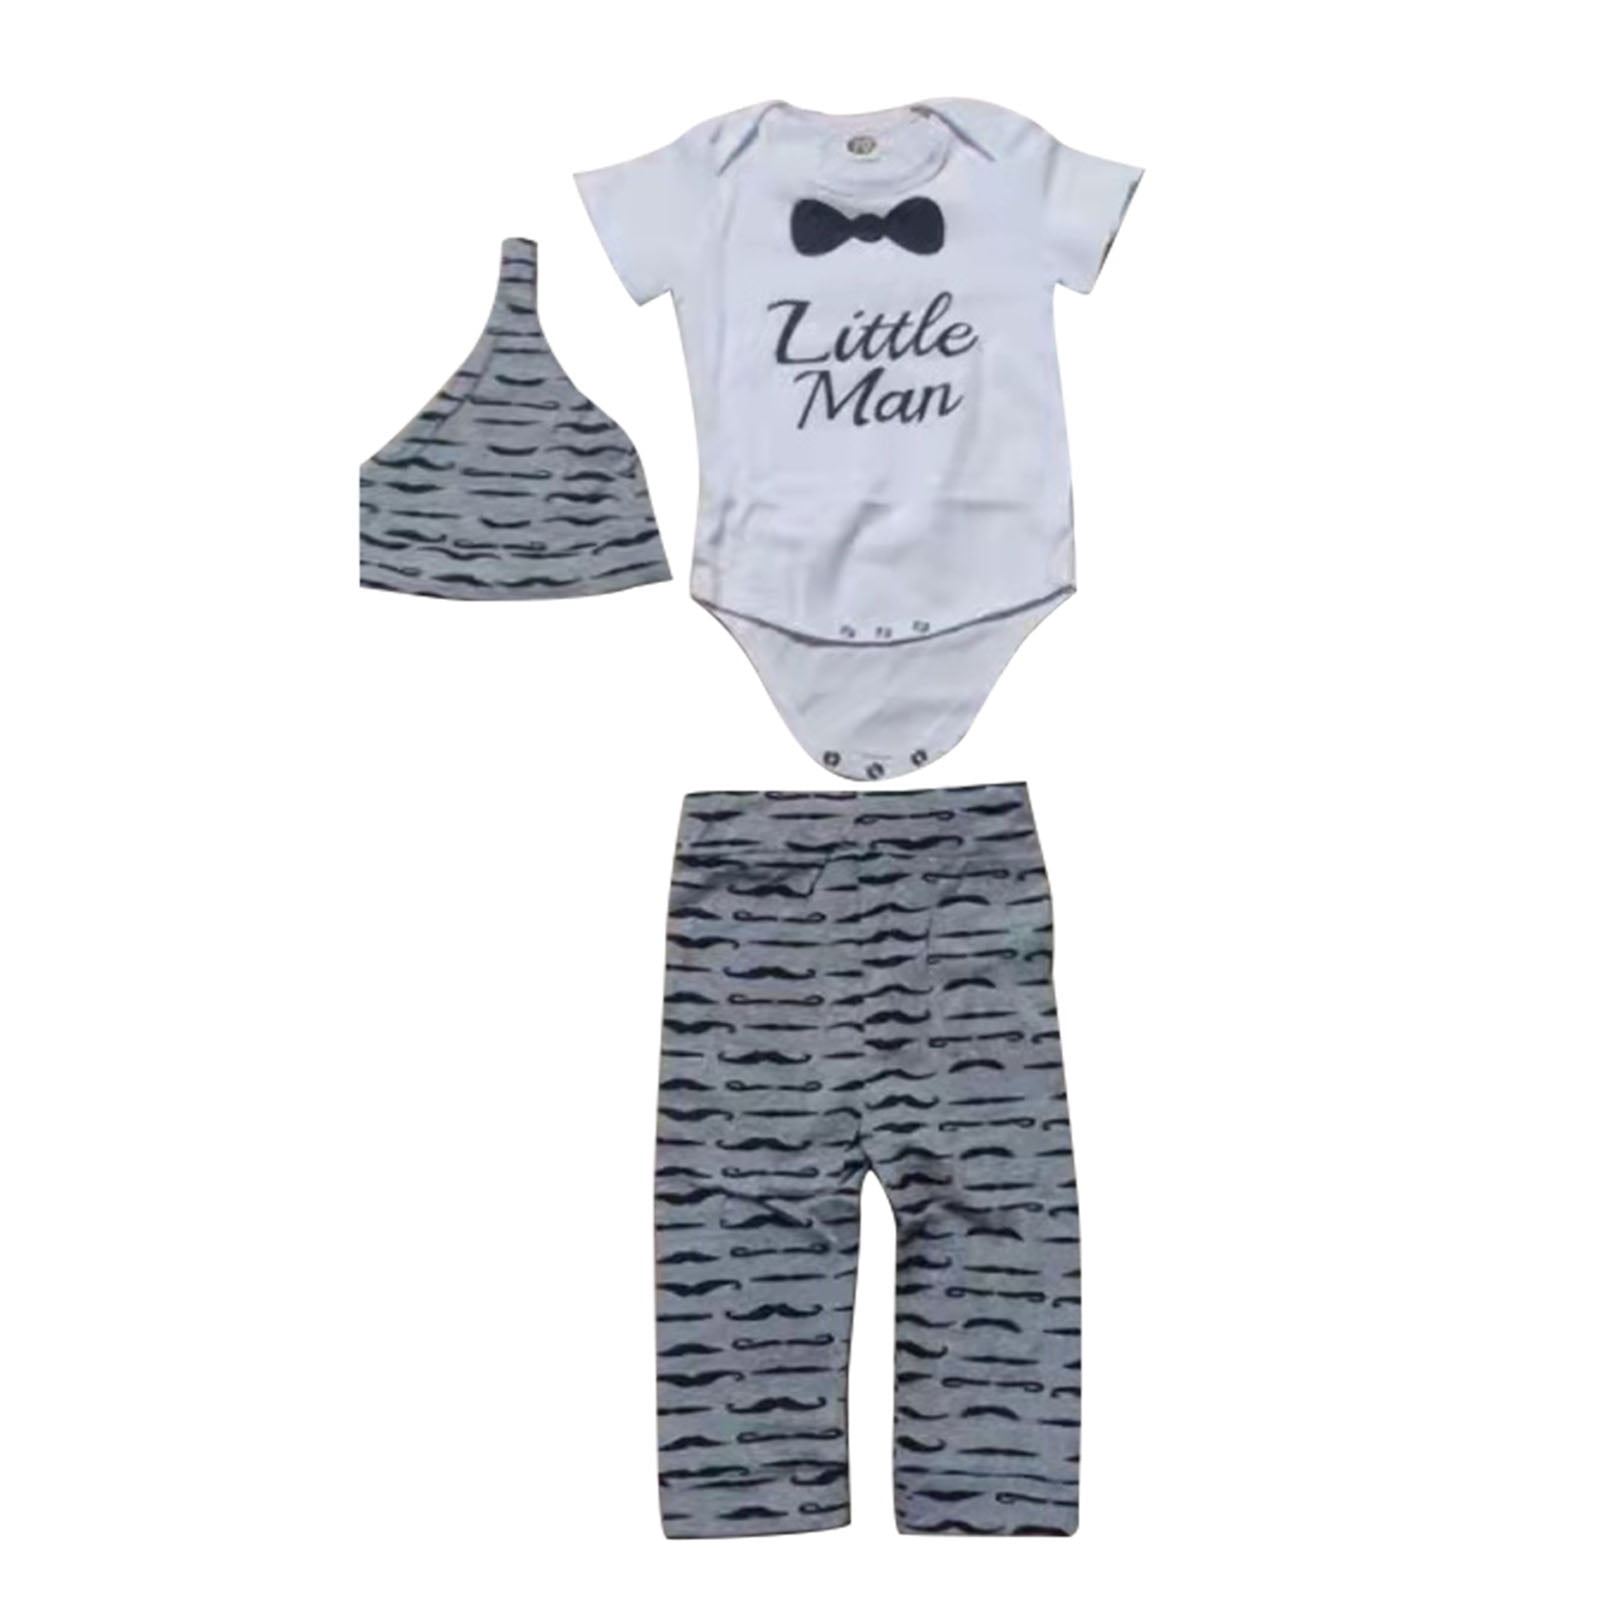 Newborn Infant Baby Boy Clothes Hoodies Top T Shirt Short Pants Outfits US Stock 